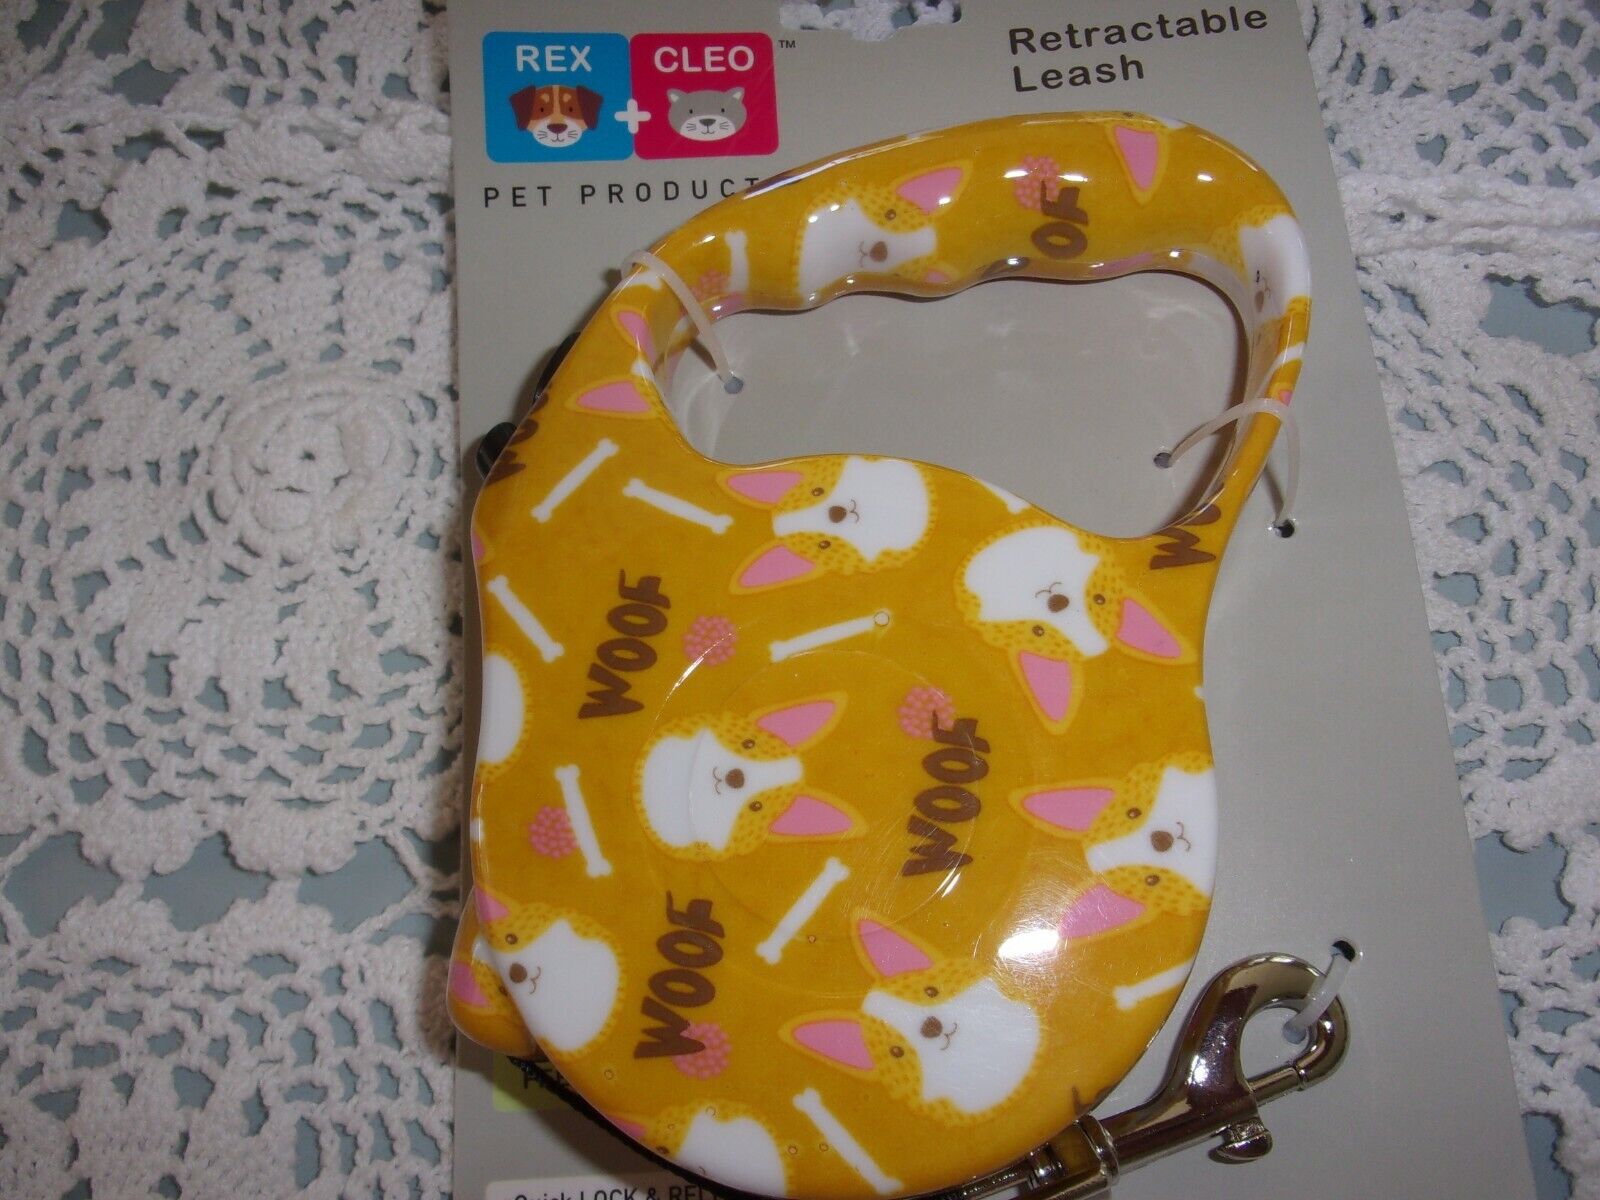 WOOF RETRACTABLE Dog Tape LEASH 15 FT new Rex and Cleo